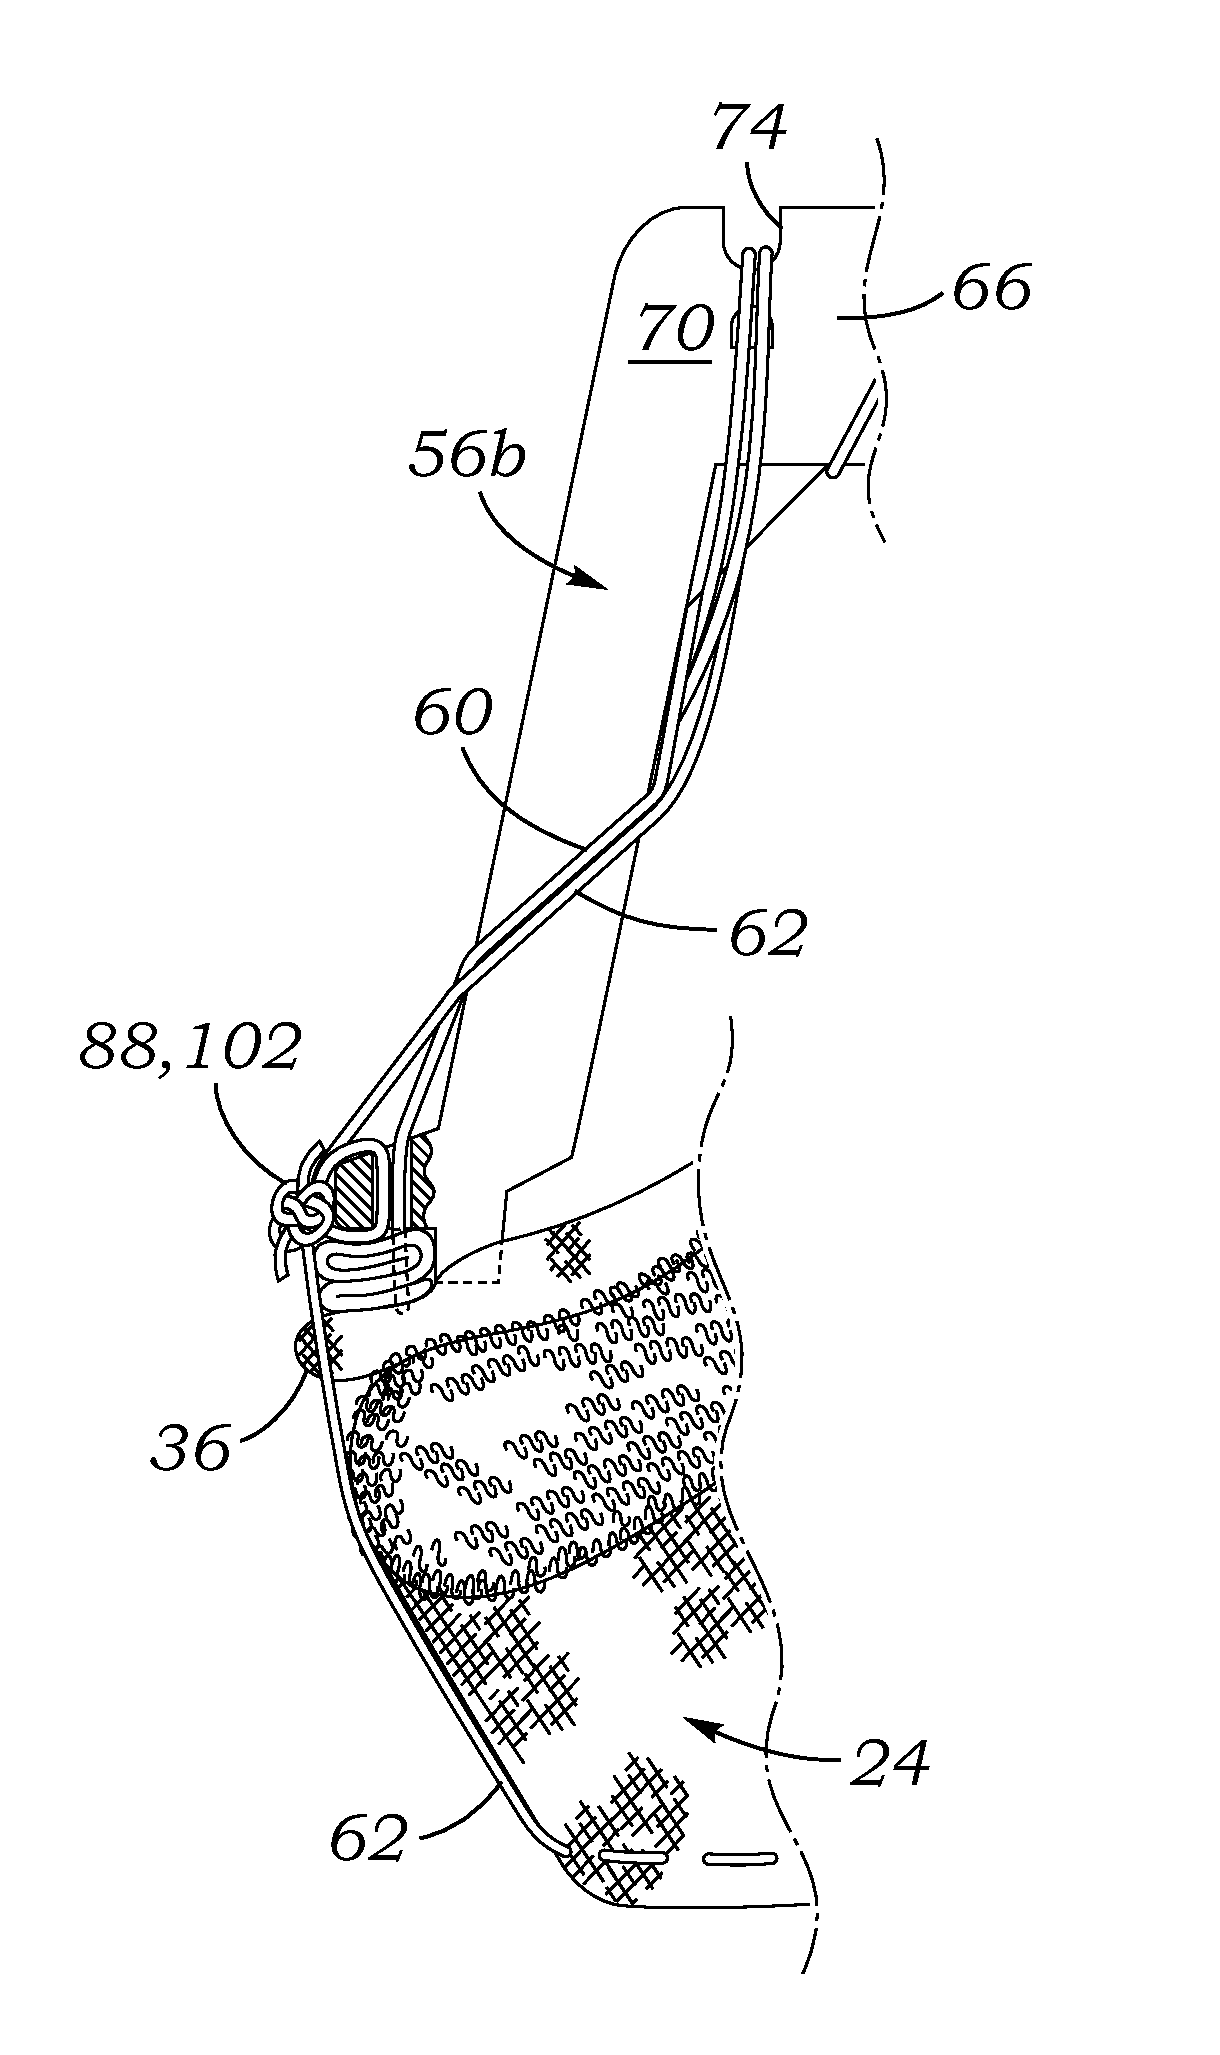 Holder and deployment system for surgical heart valves